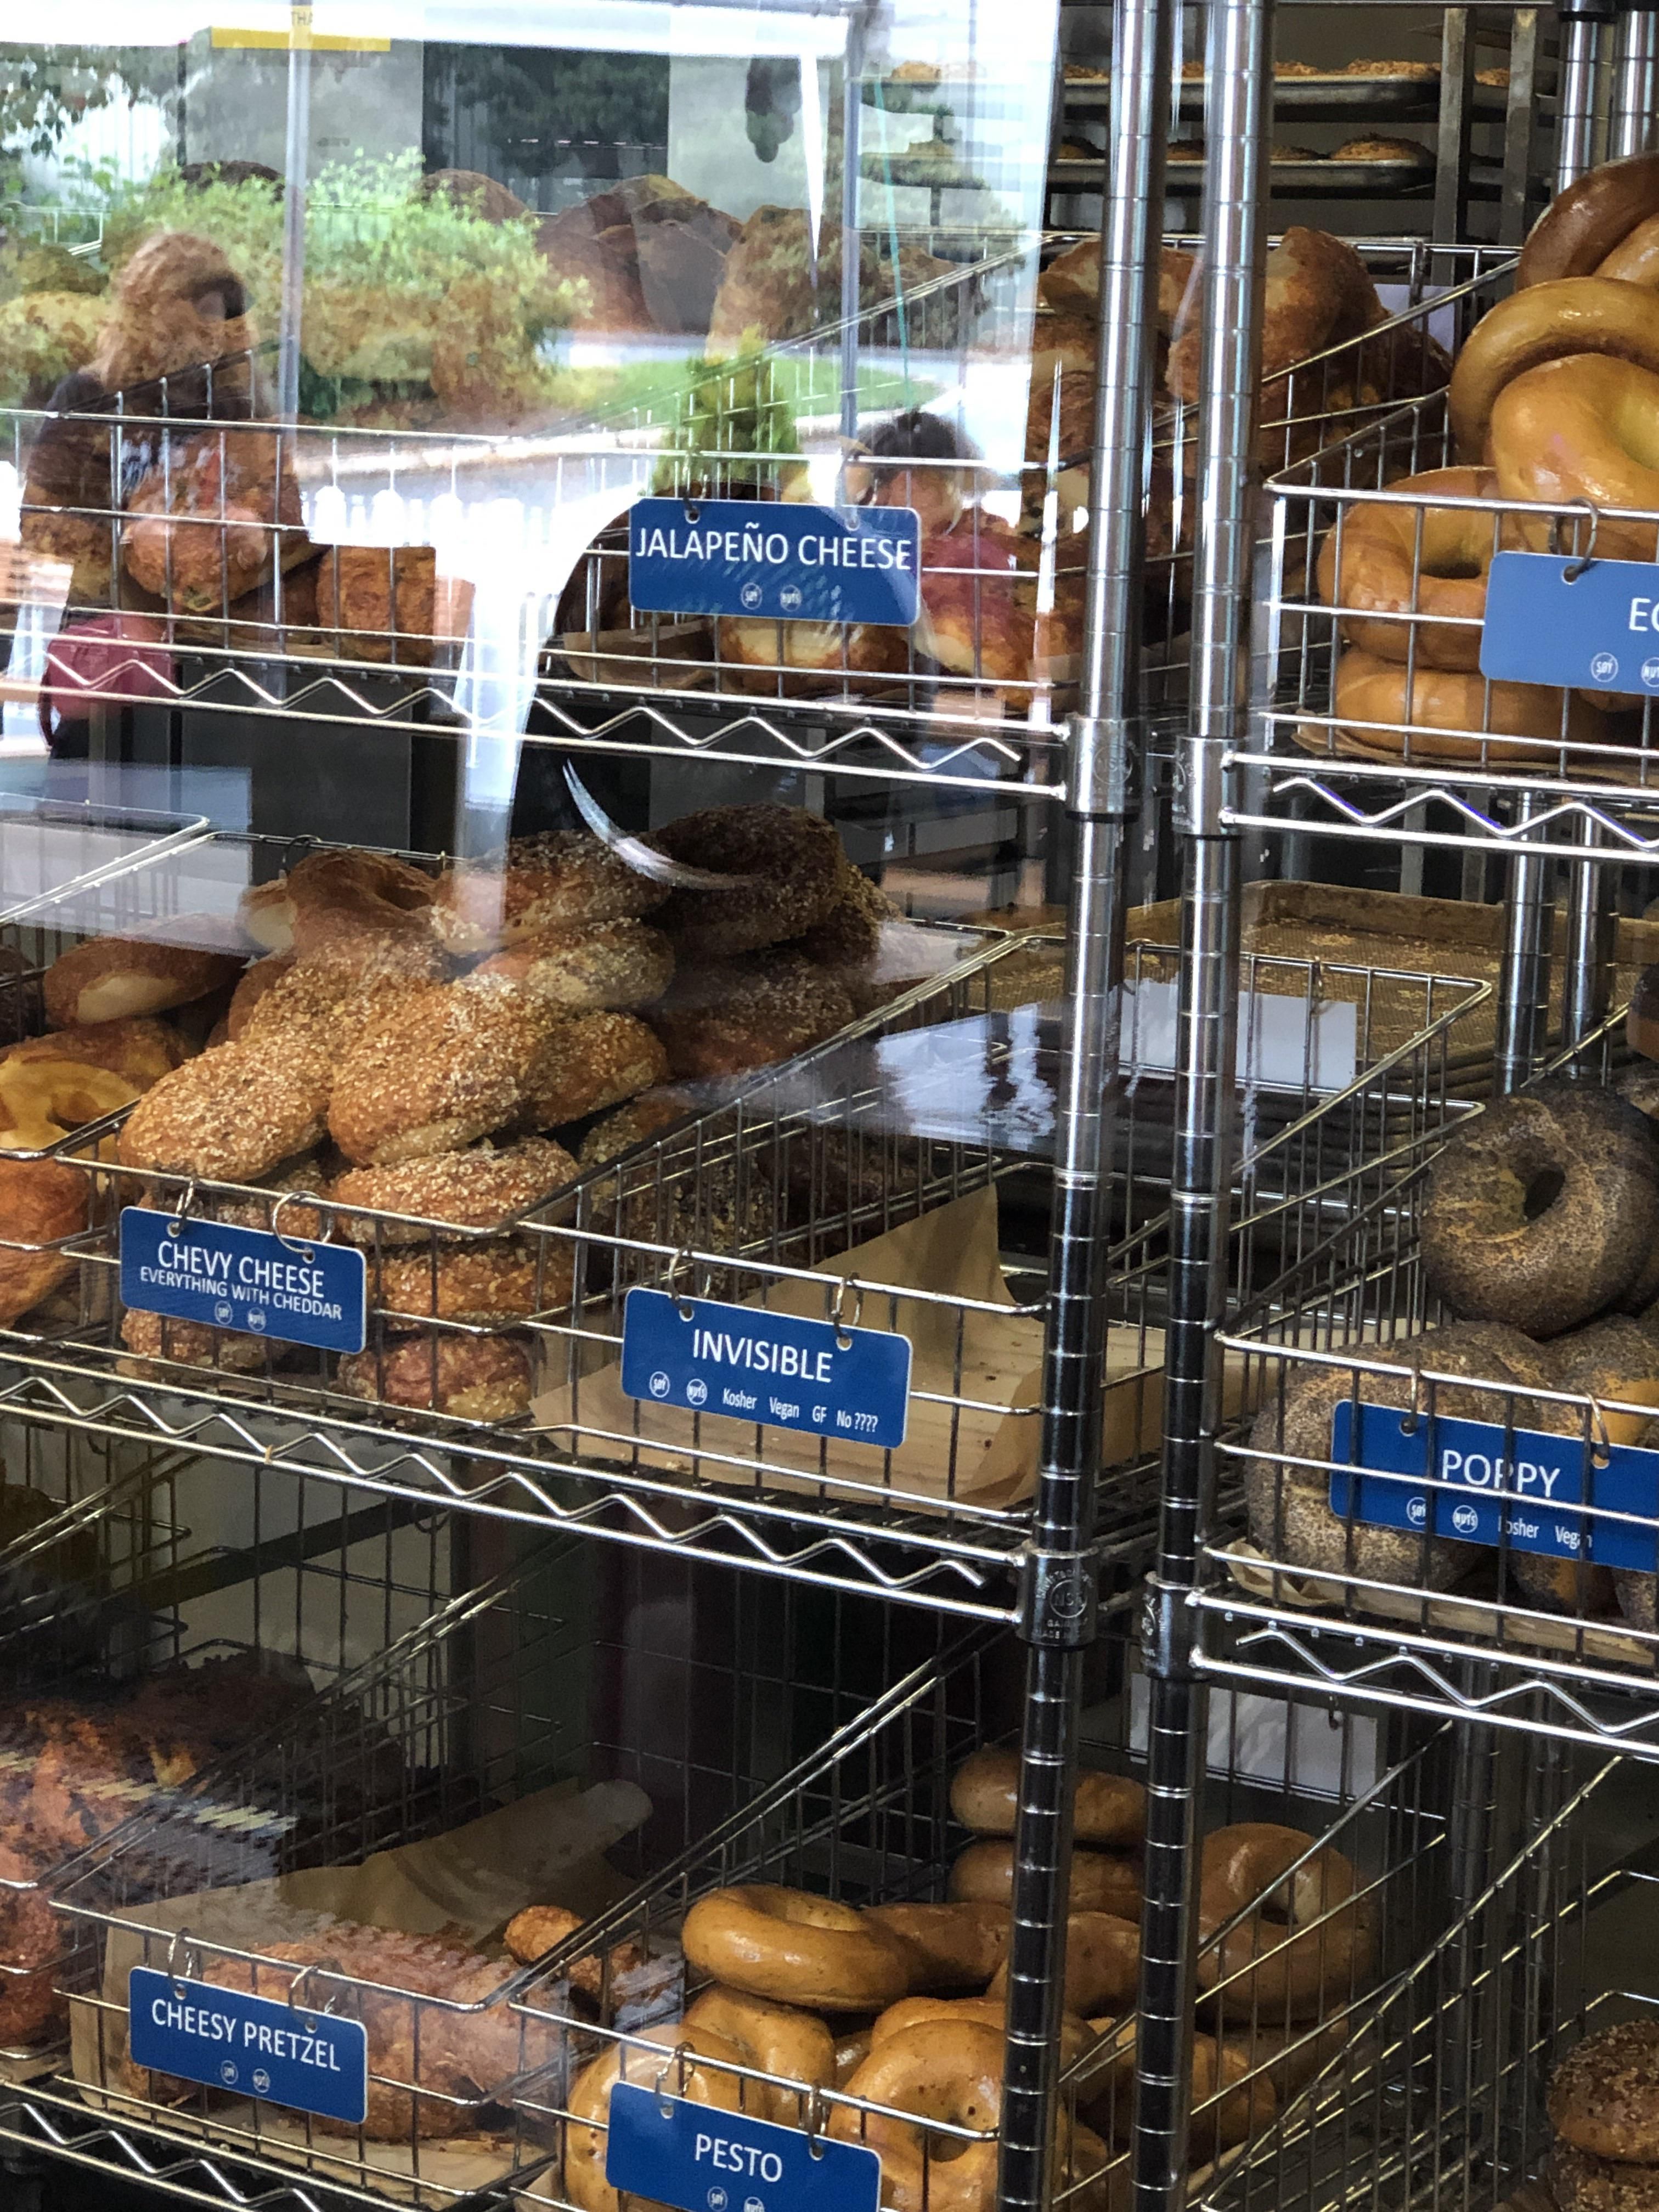 At my local bagel shop.